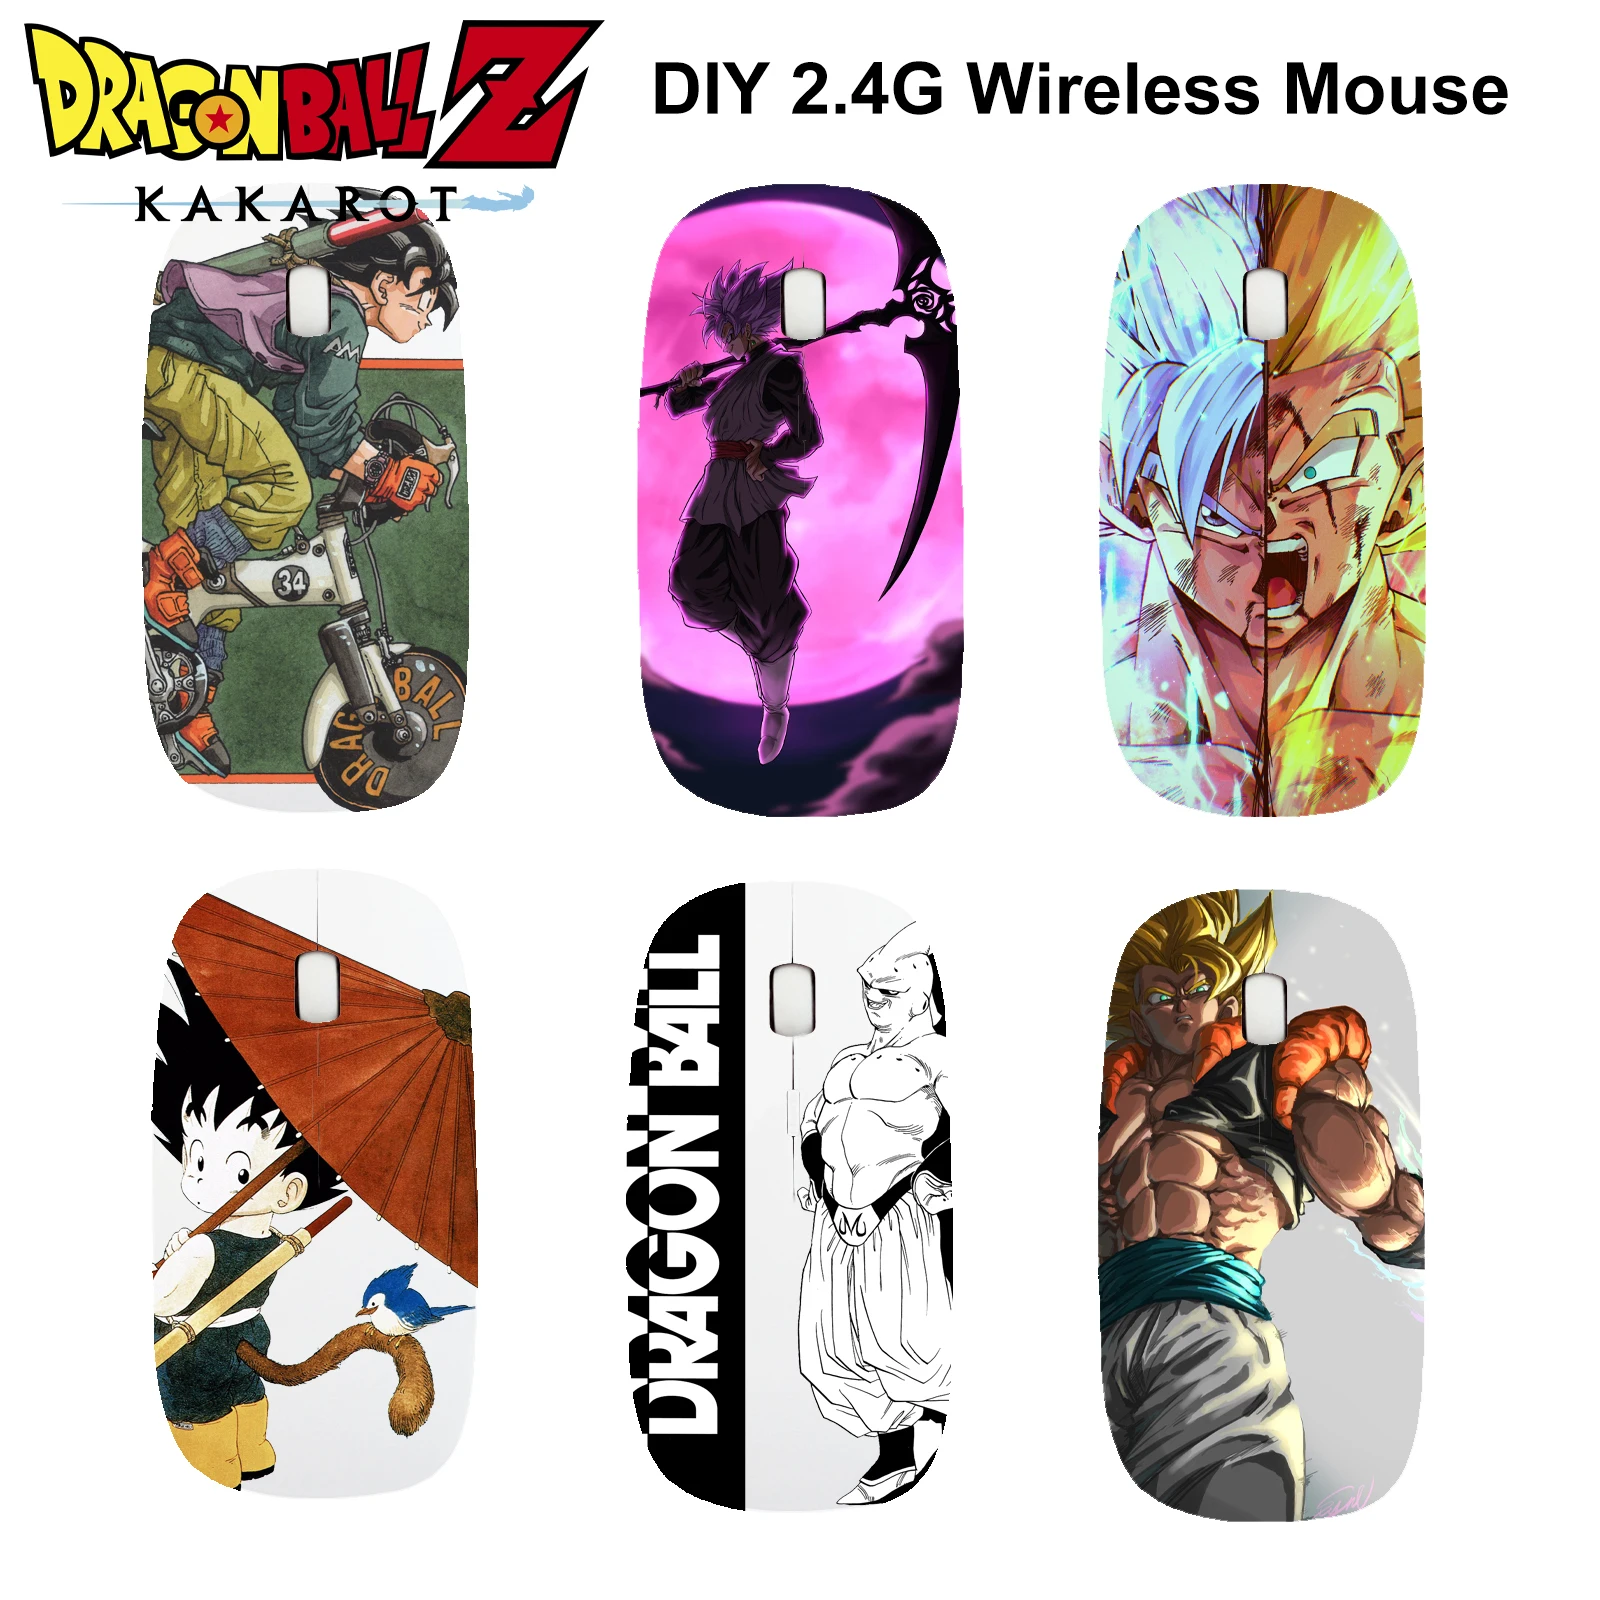 DIY Dragon Ball Goku Buu Freeza 2.4G Wireless Mouse Bluetooth Gamer Computer Gaming Mouse USB Receiver Mice For Laptop PC Office